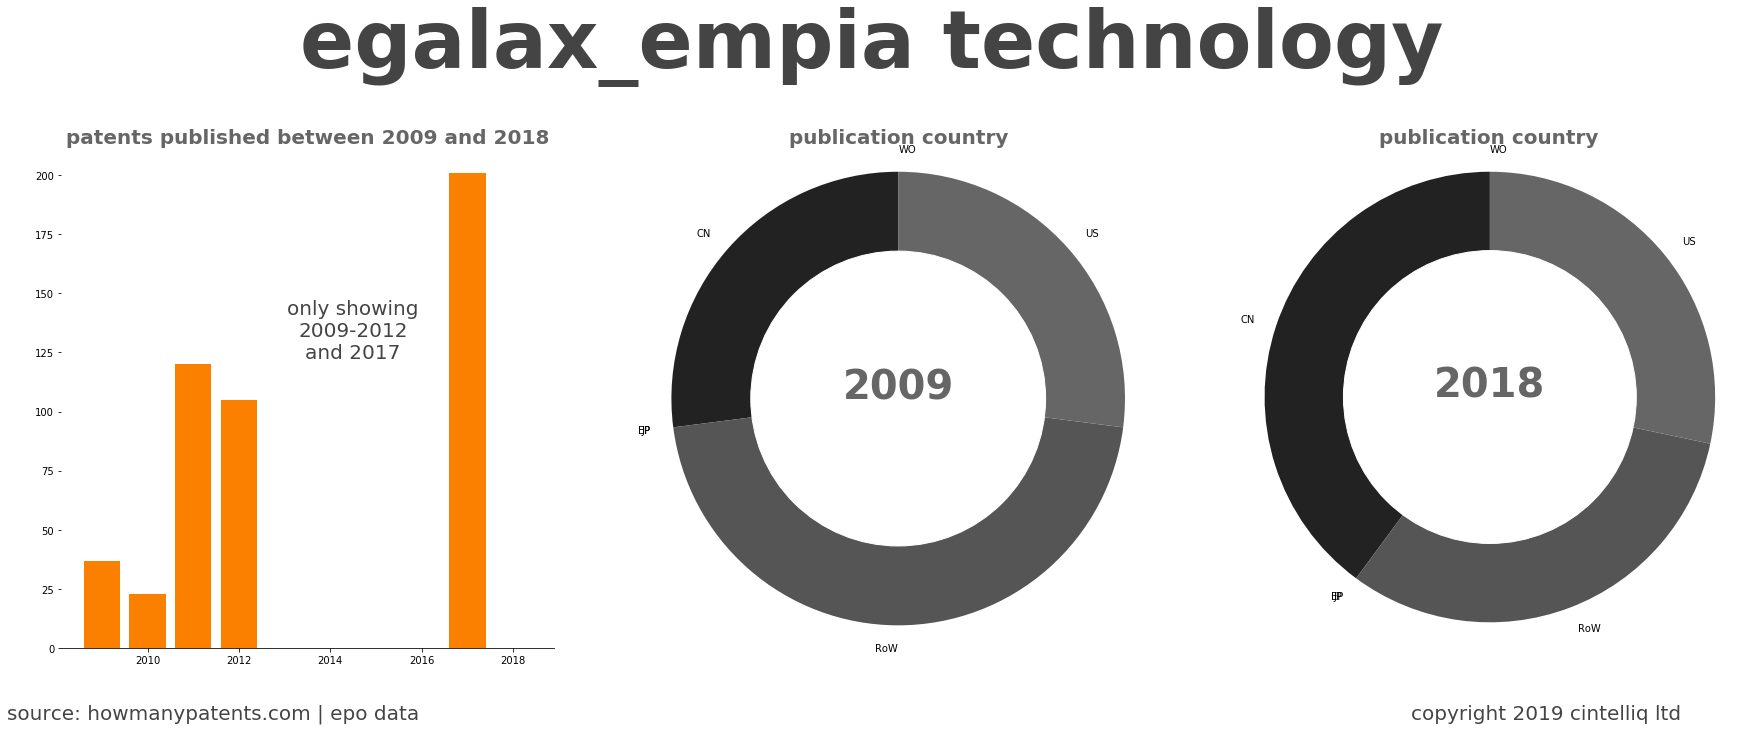 summary of patents for Egalax_Empia Technology